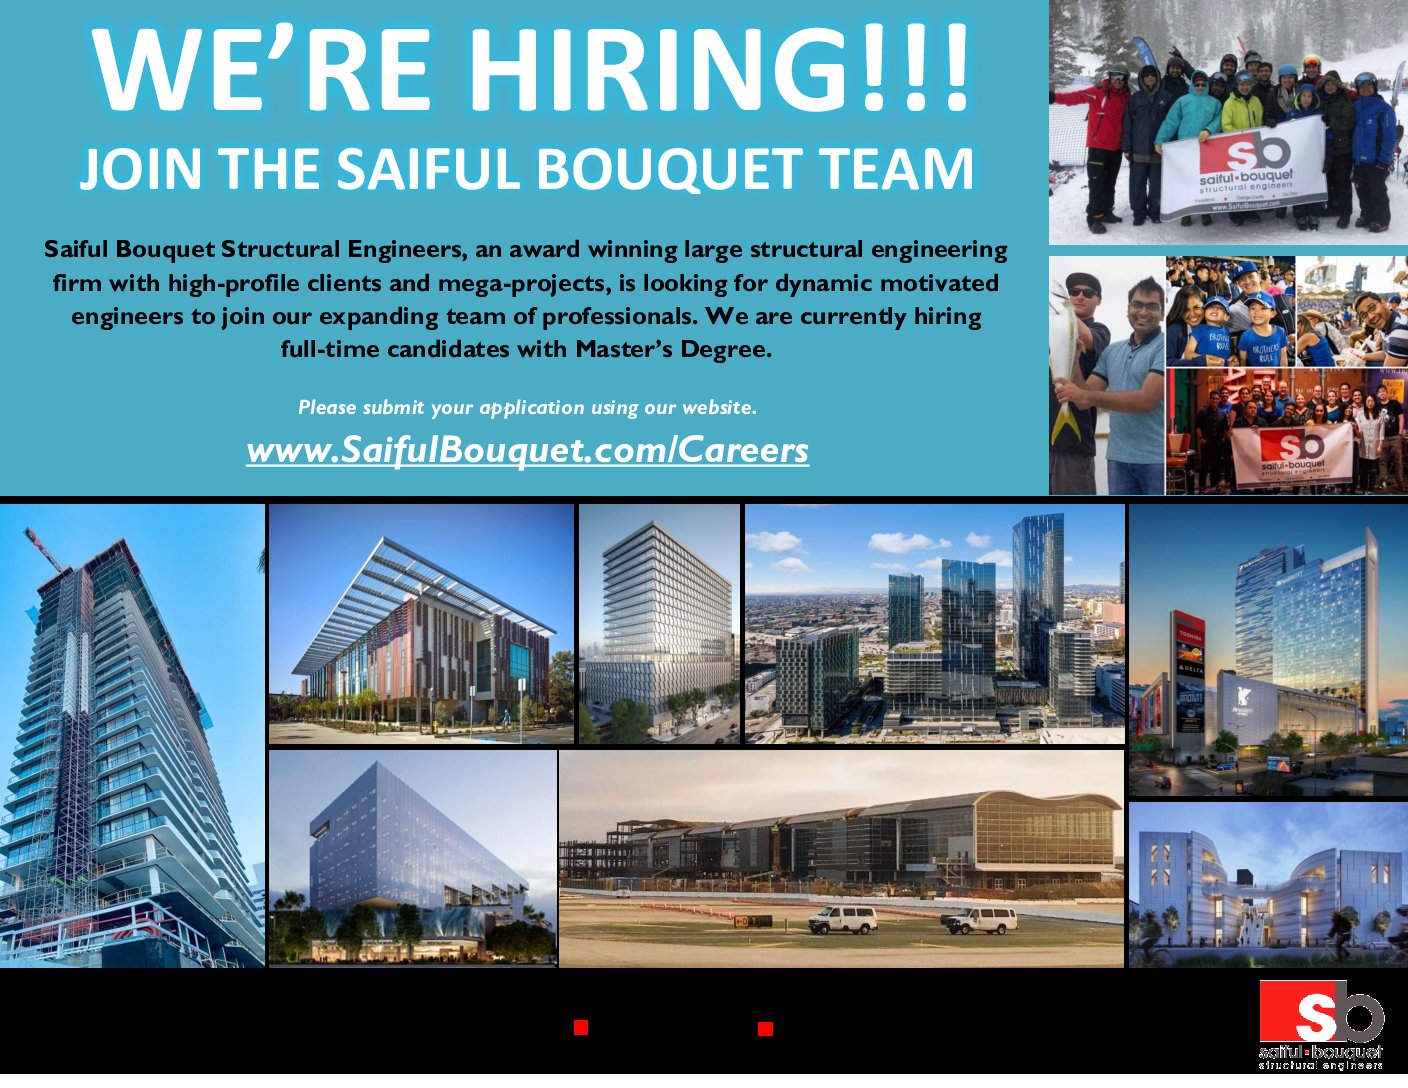 Featured image for “WE’RE HIRING!!! JOIN THE SAIFUL BOUQUET TEAM”